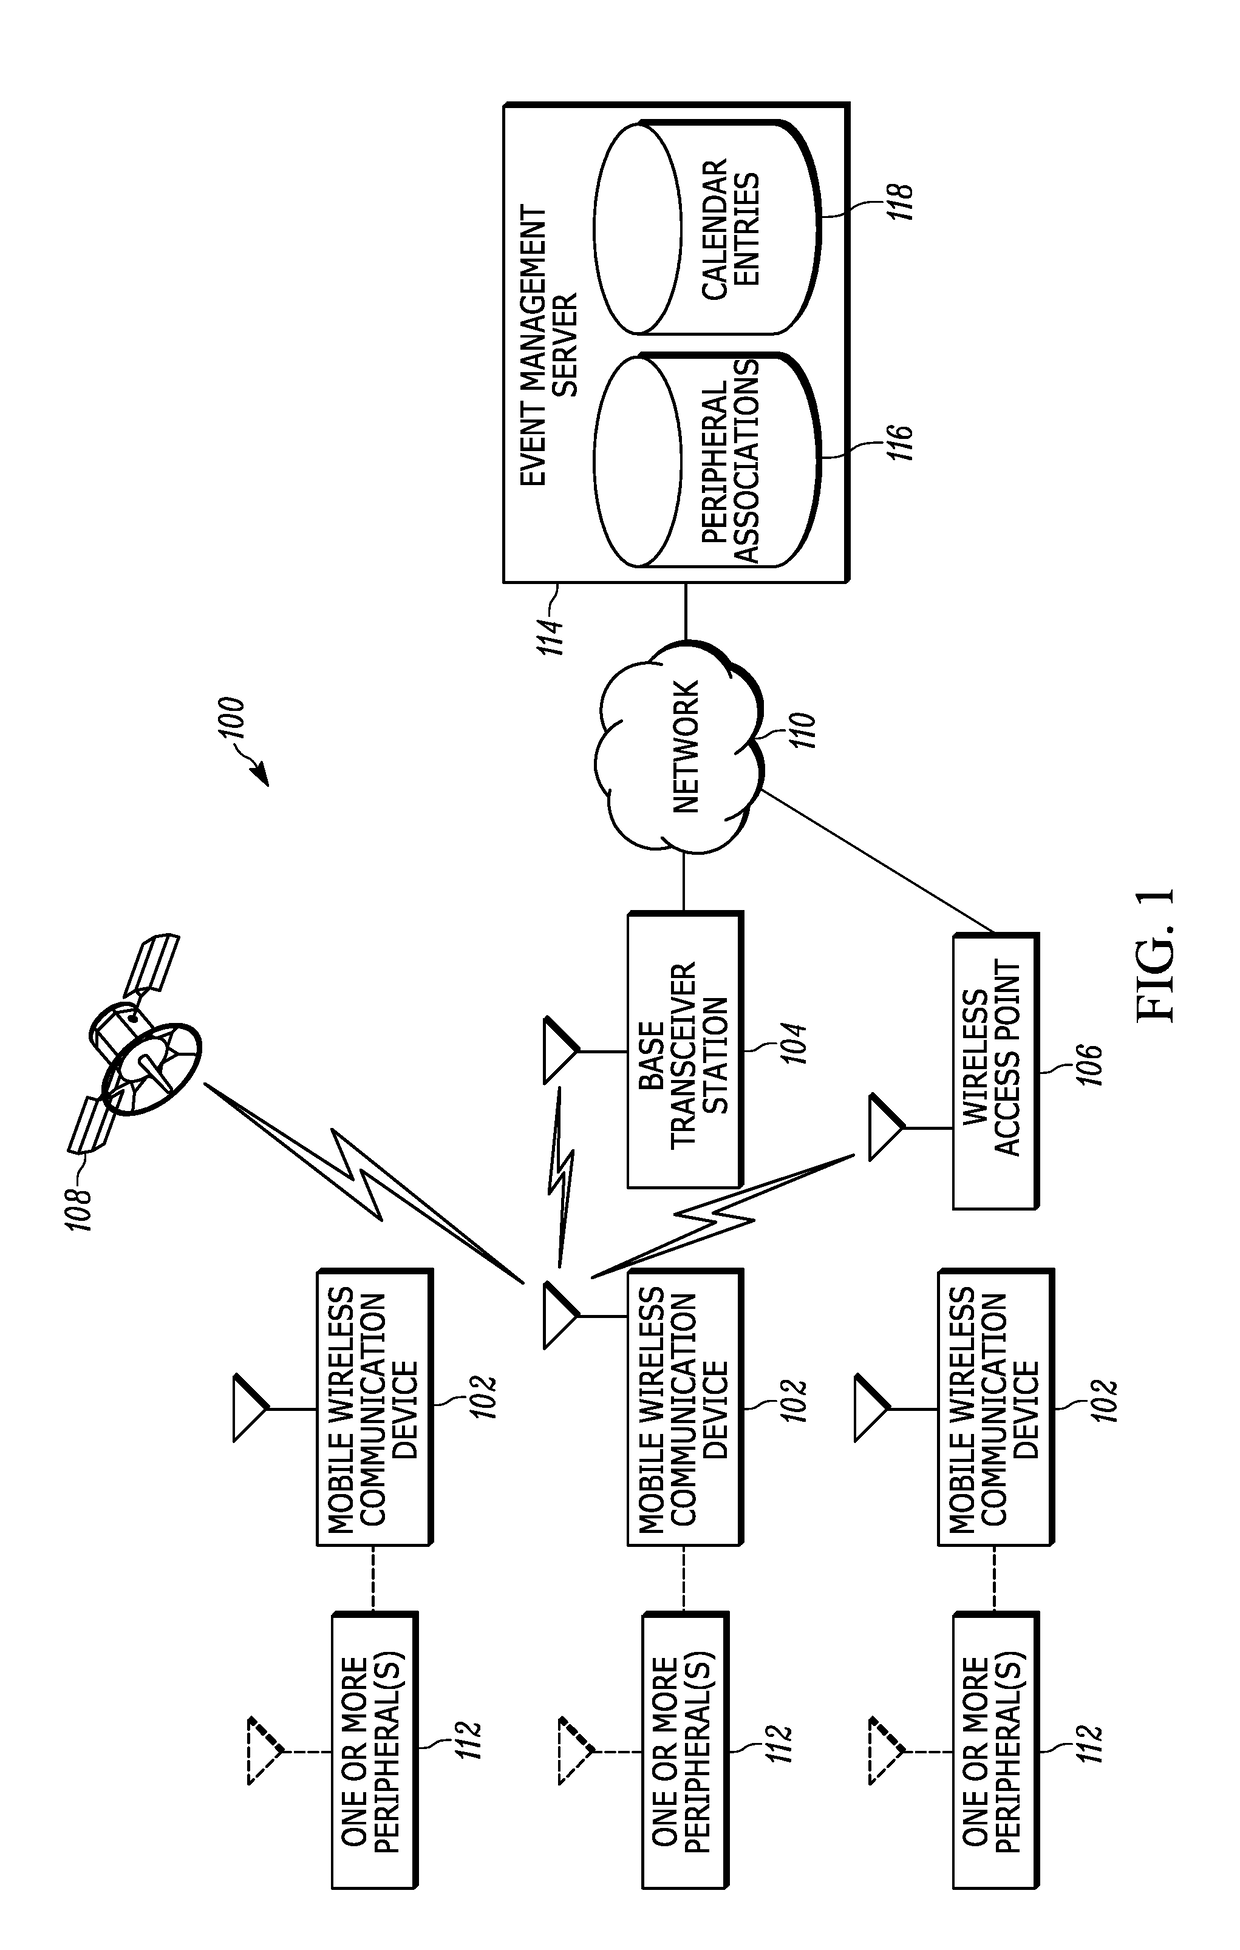 Mobile wireless communication system, network and method for managing the use of a peripheral in connection with an upcoming event